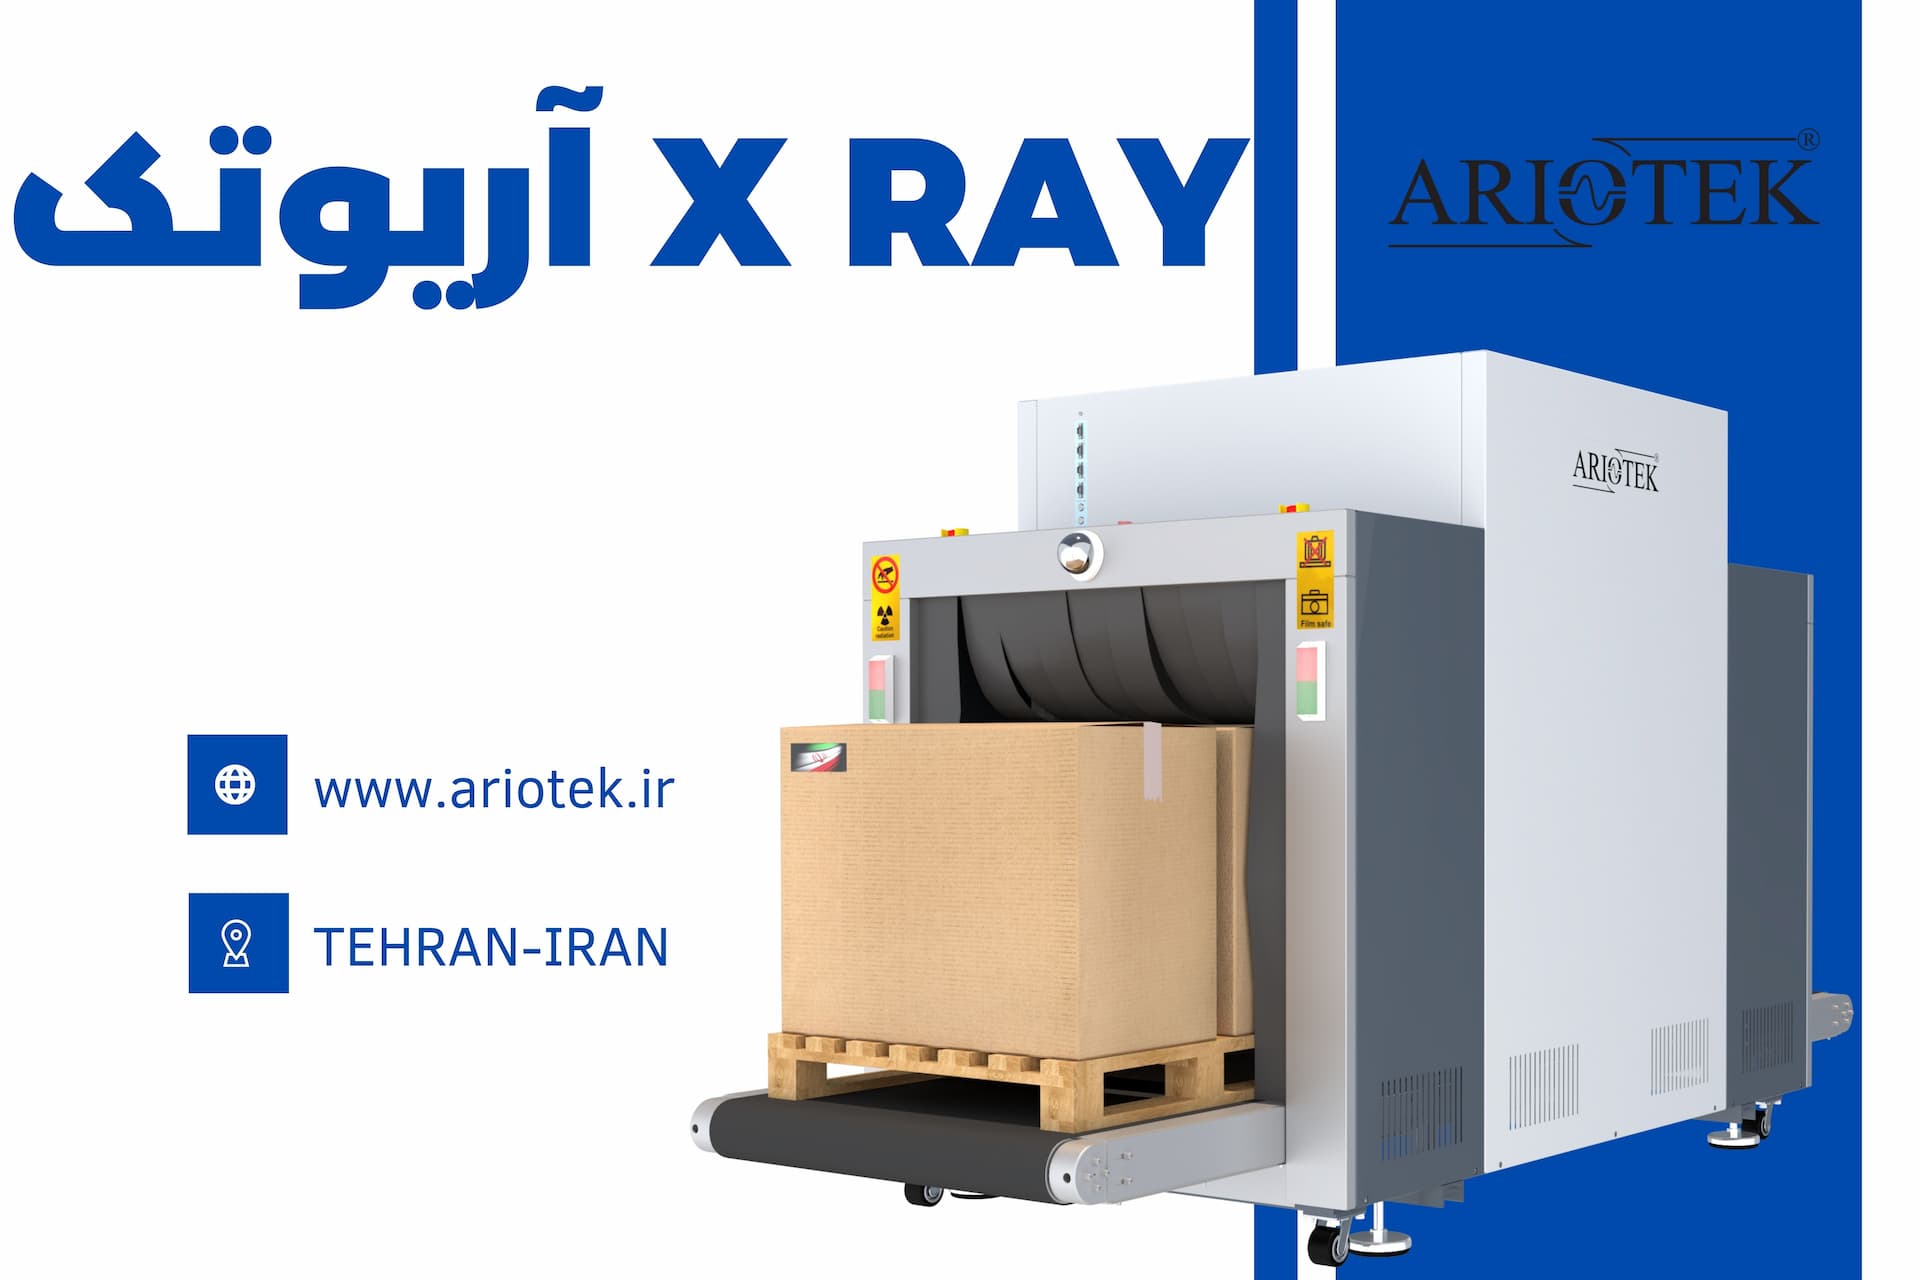 X RAY آریوتک